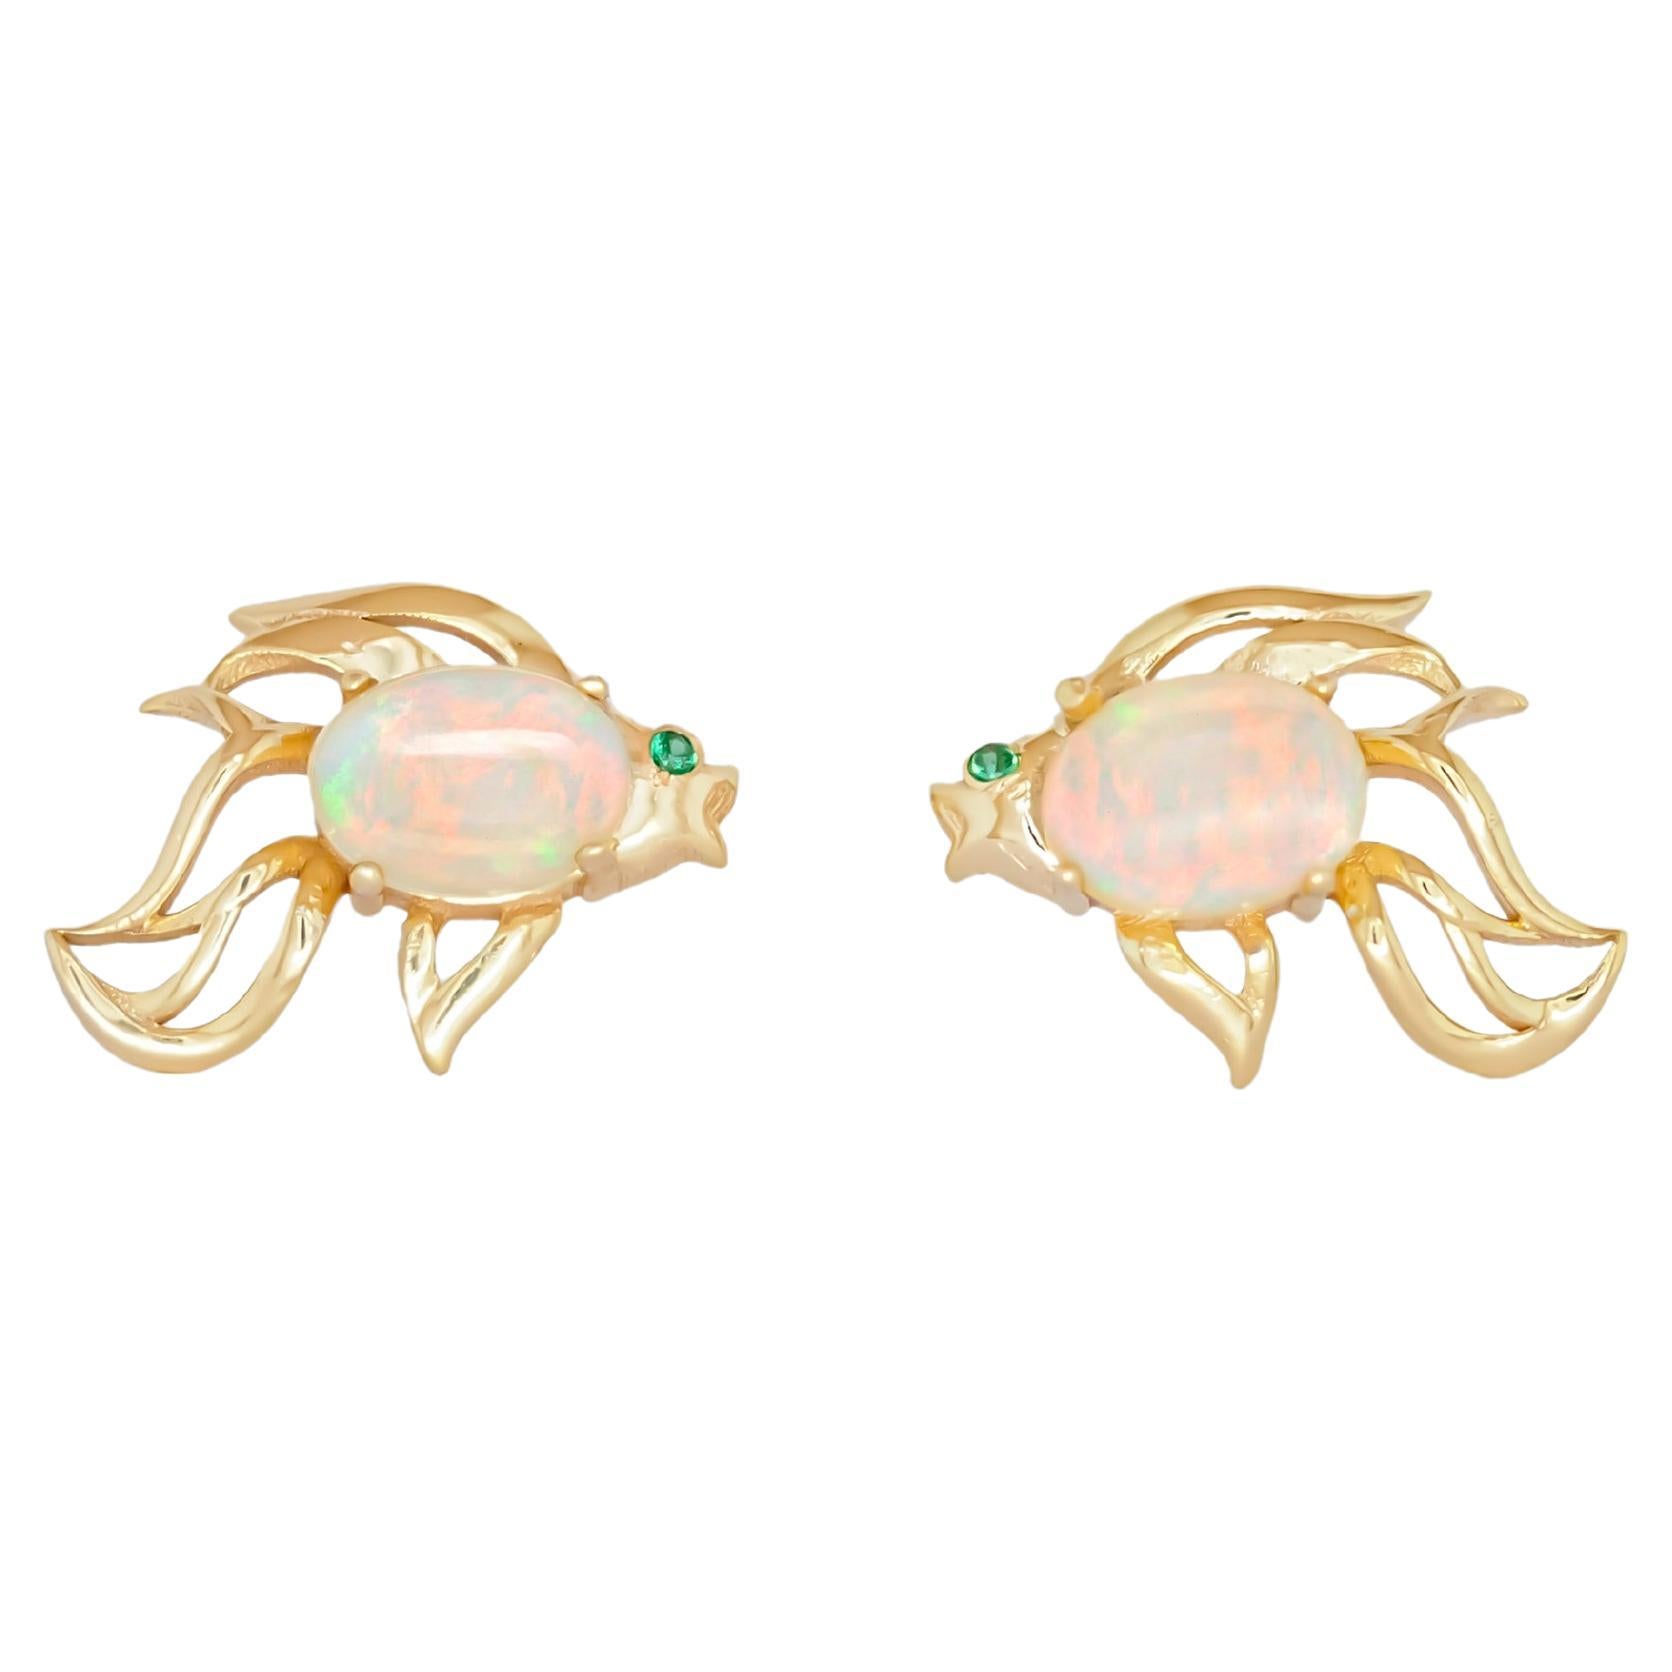 14k gold Fish earrings studs set in 14k gold. For Sale